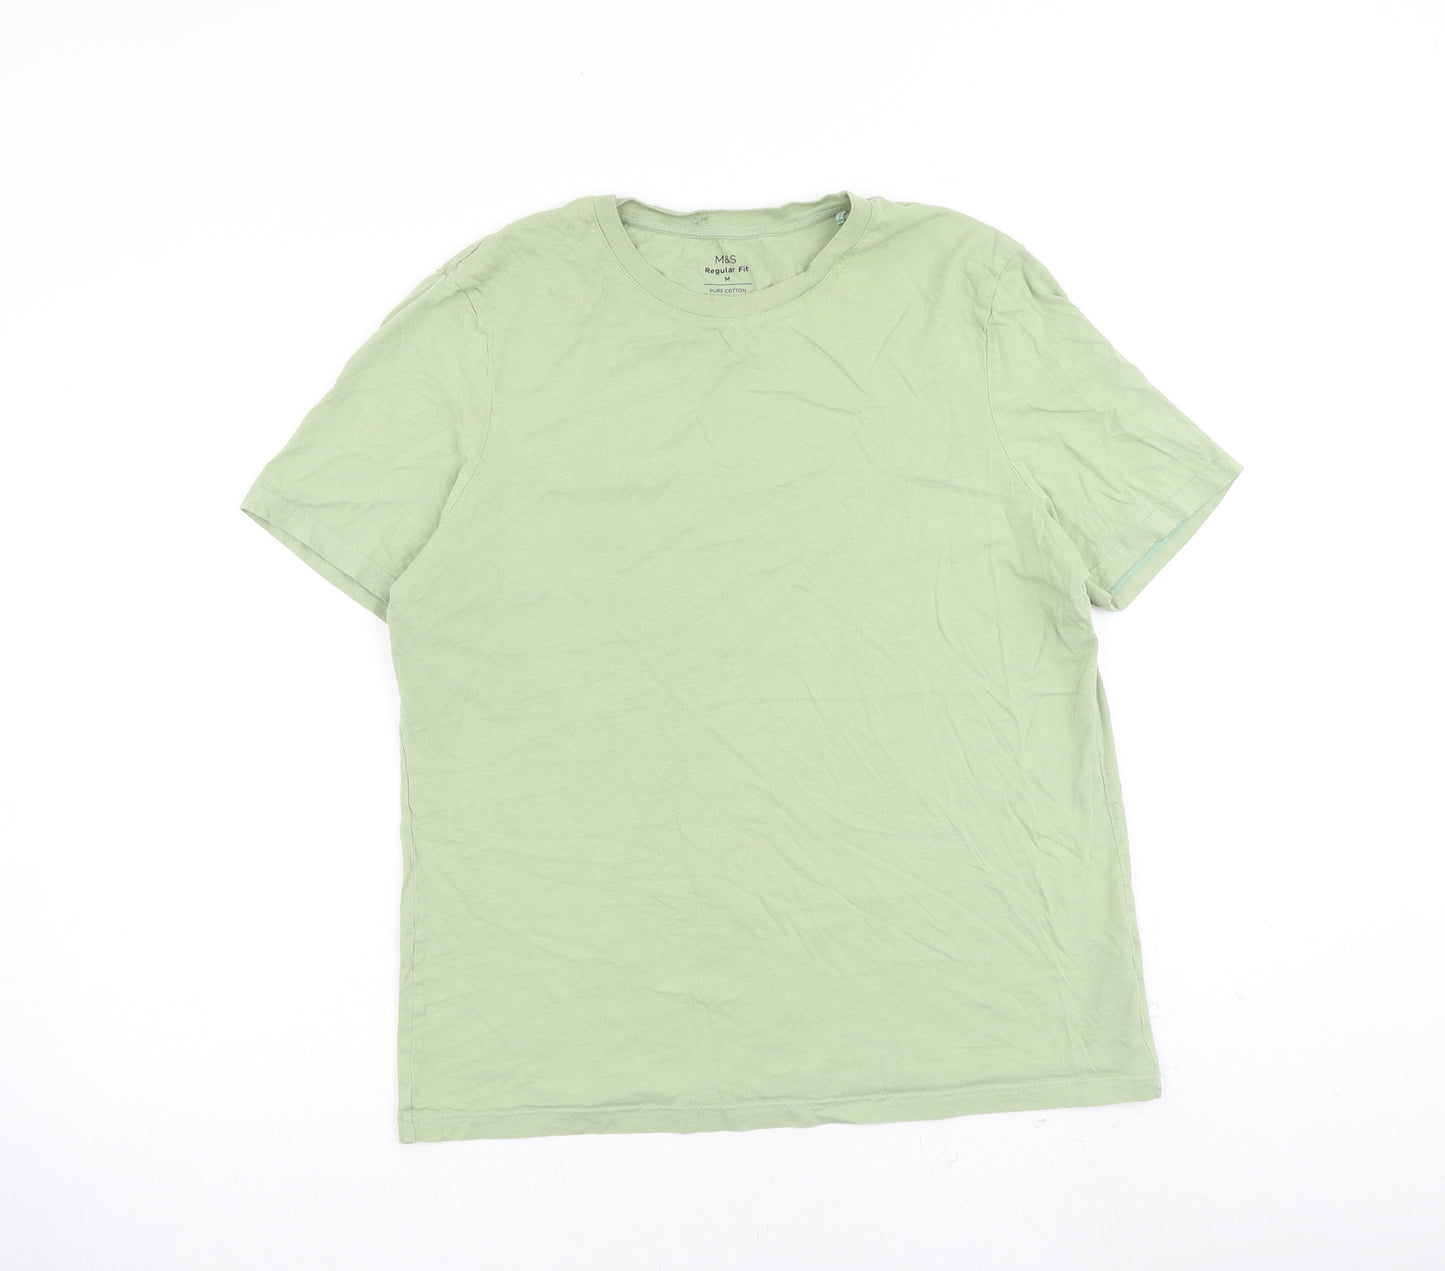 Marks and Spencer Mens Green Cotton T-Shirt Size M Crew Neck